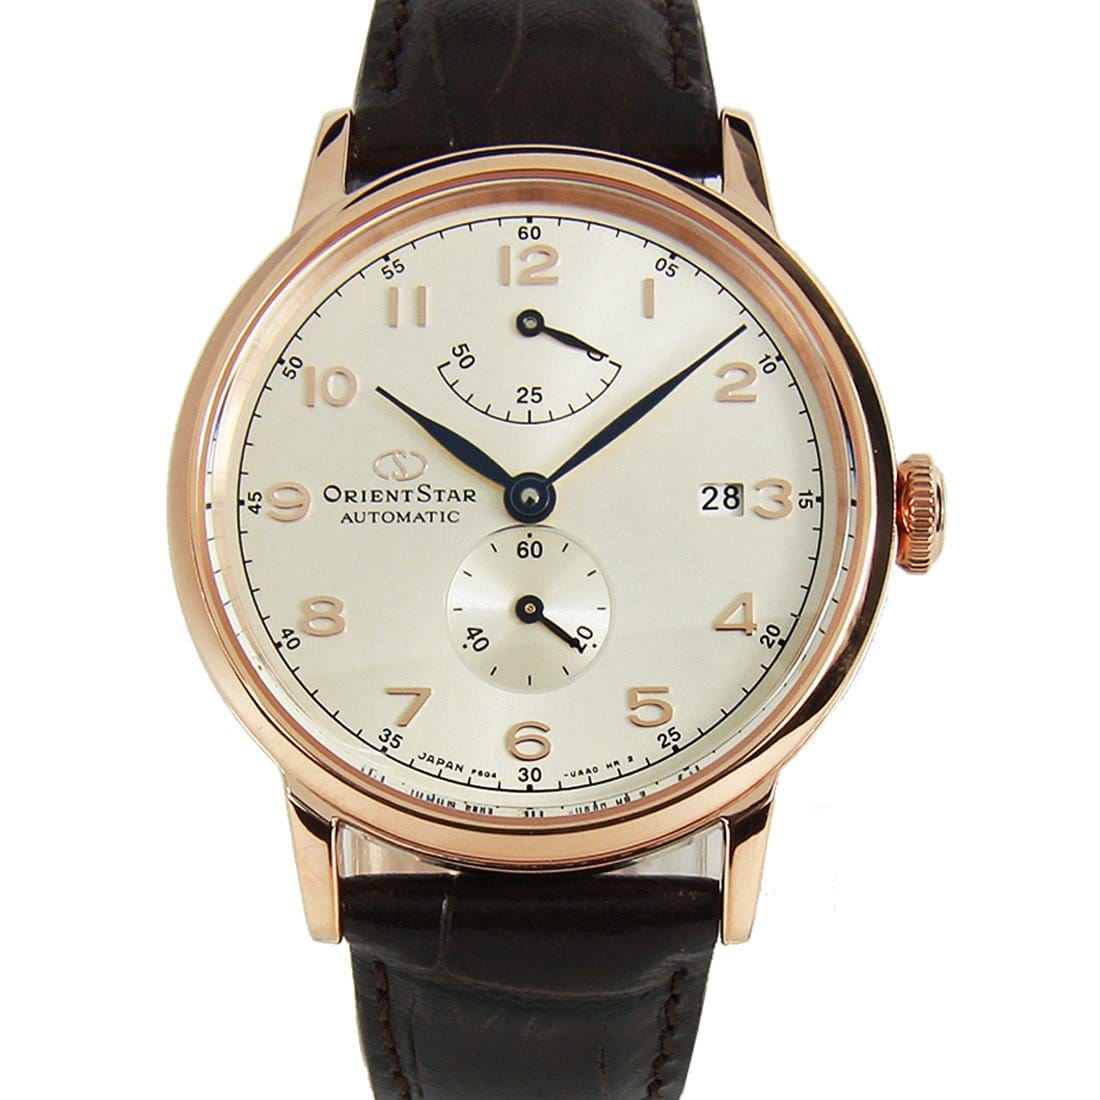 Orient Star Automatic Power Reserve Mens Watch RE-AW0003S00B